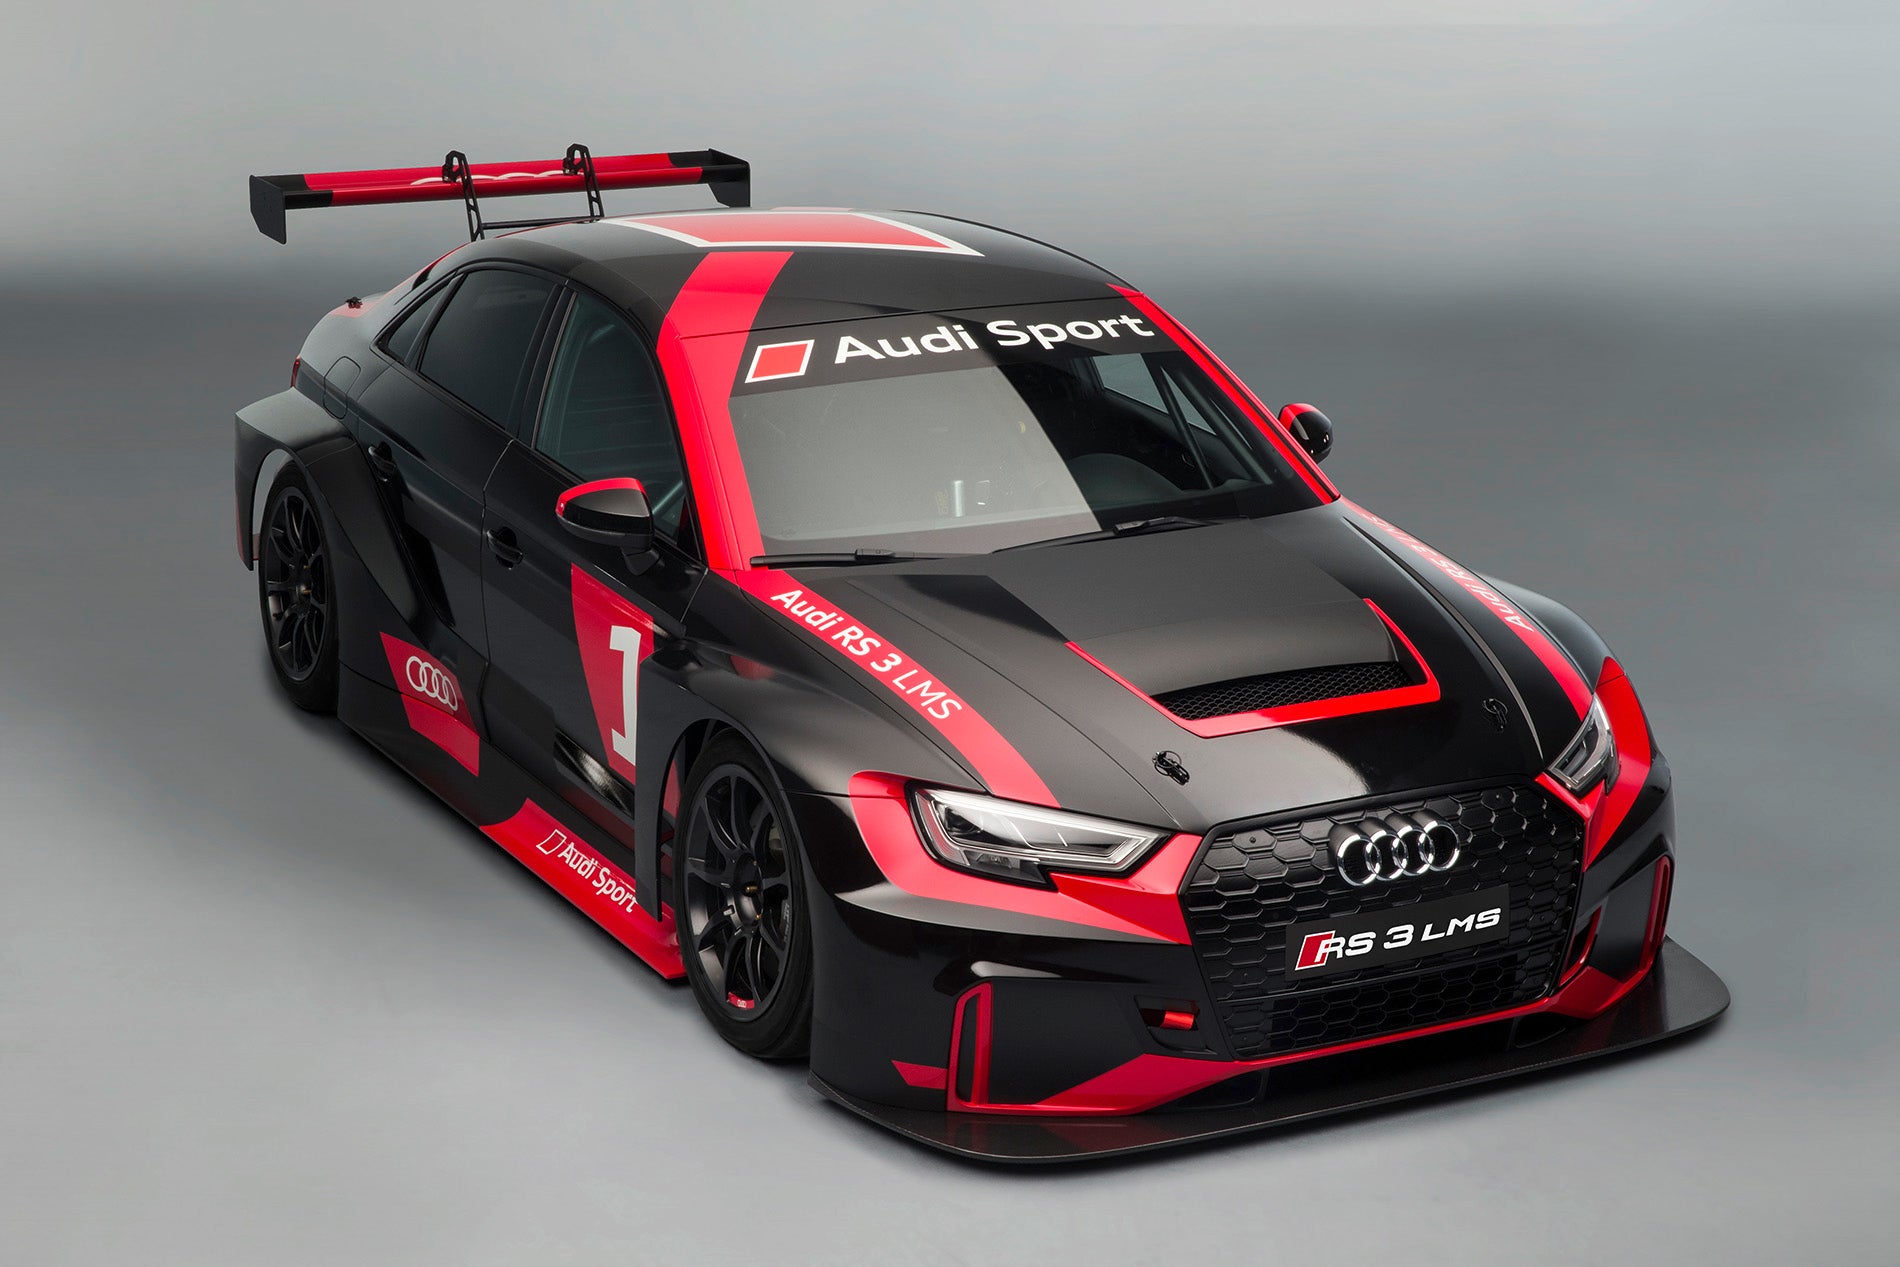 https://www.quattroworld.com/wp-content/gallery/audi-rs-3-lms/A1610626_large.jpg